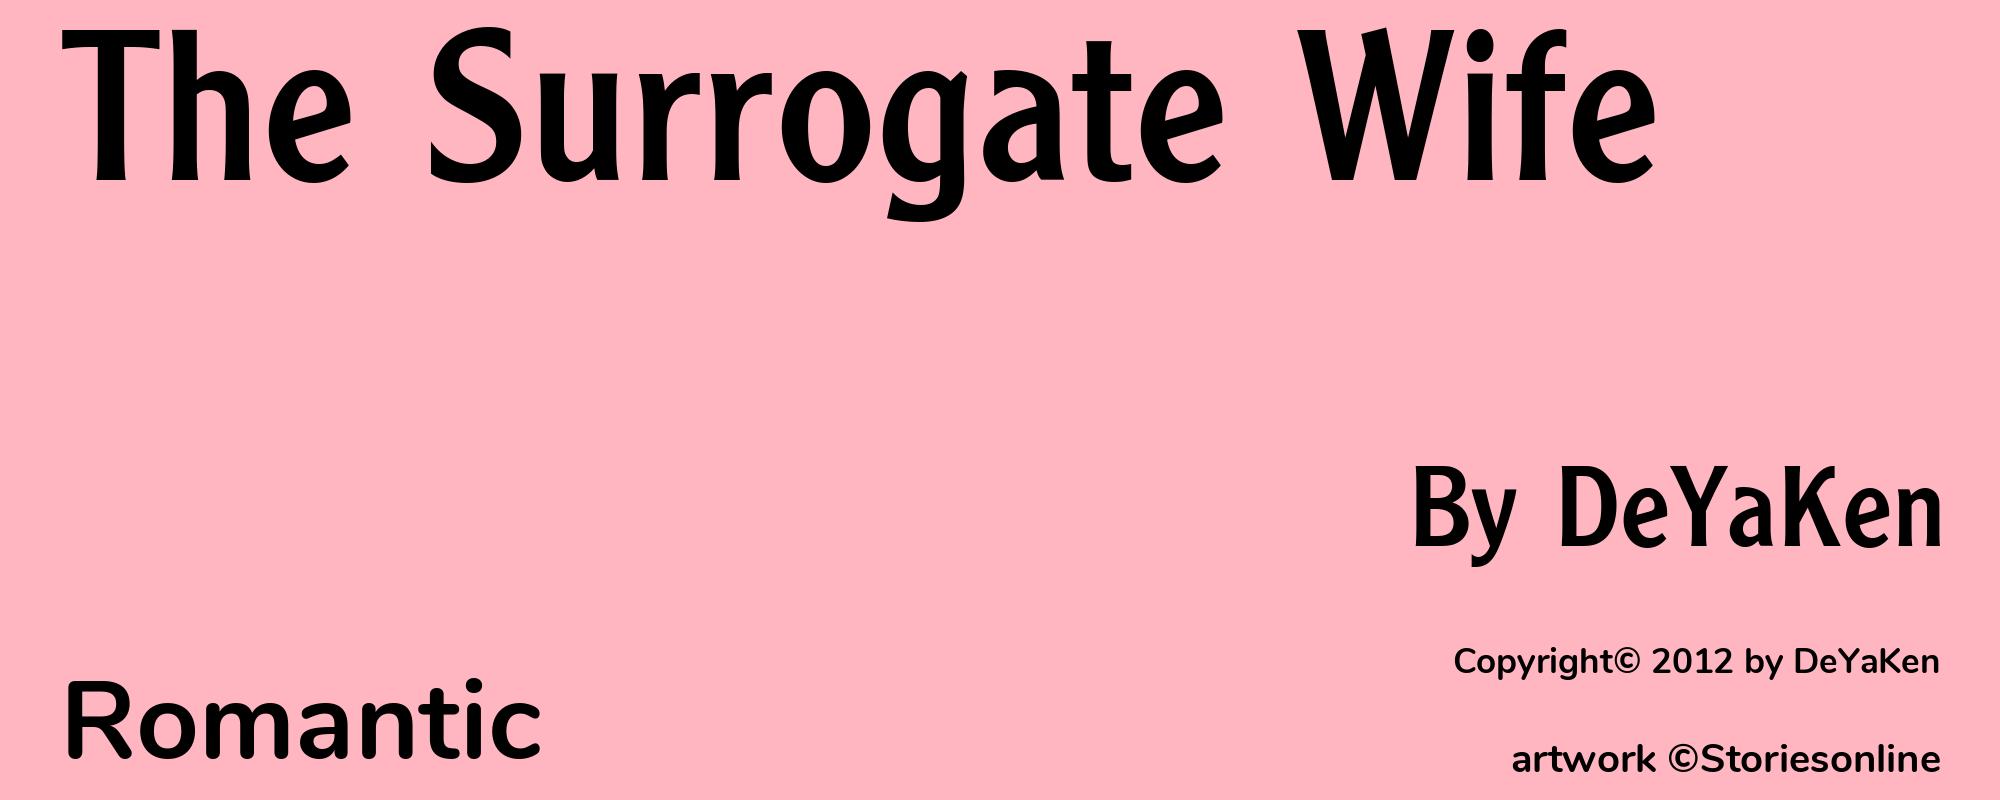 The Surrogate Wife - Cover